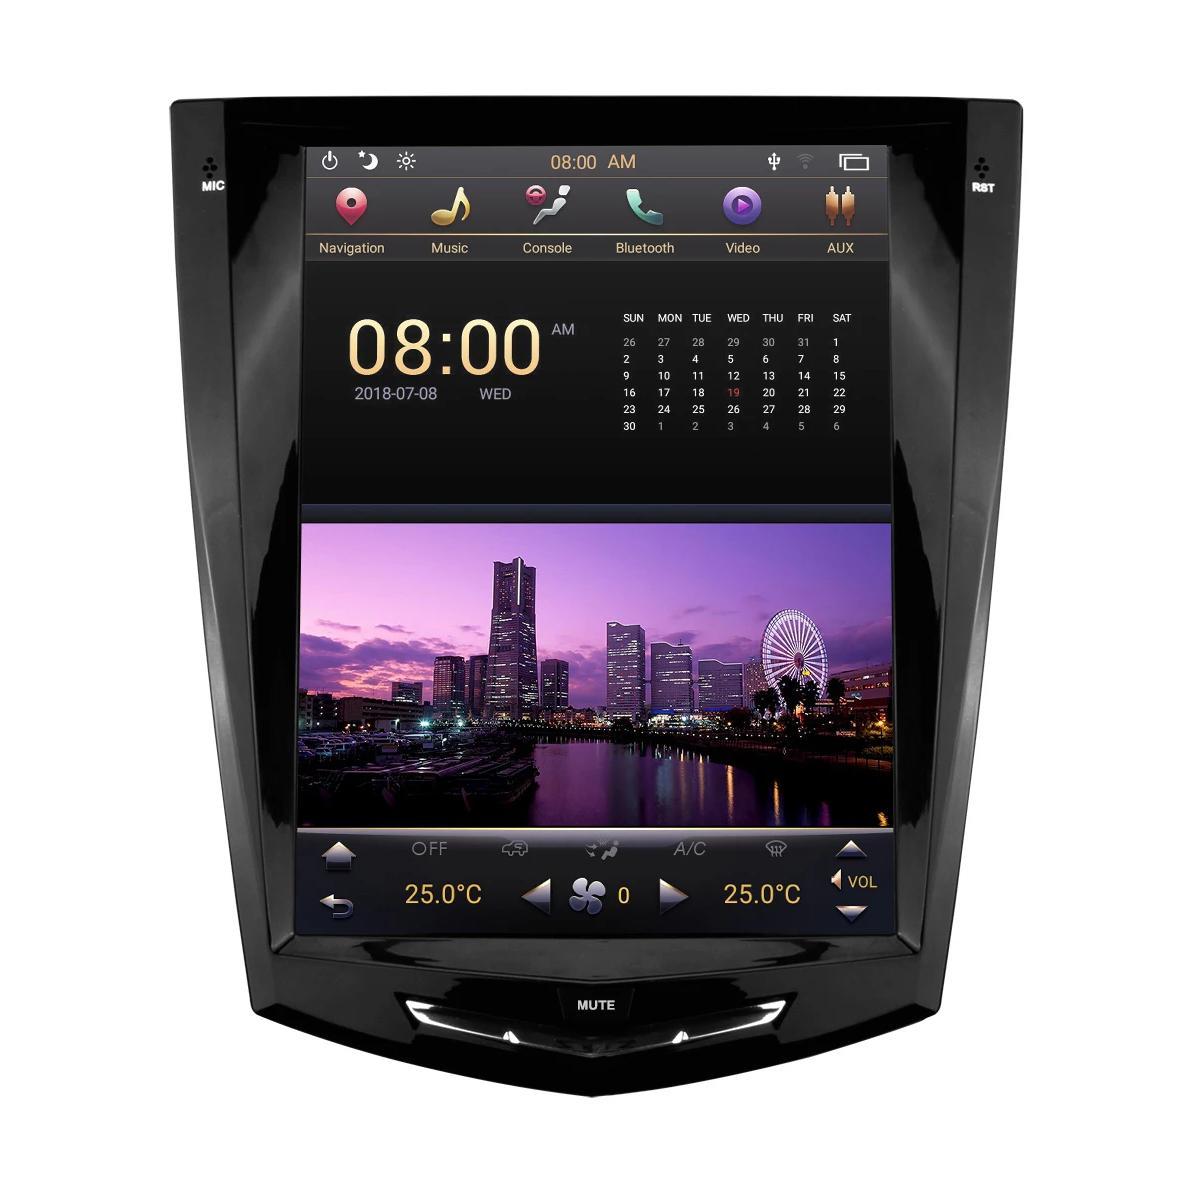 [Open Box] [PX6 SIX-CORE] 10.4" Android 9.0 fast boot Vertical Screen Navi Radio for Cadillac ATS CTS XTS SRX Escalade 2013 - 2019